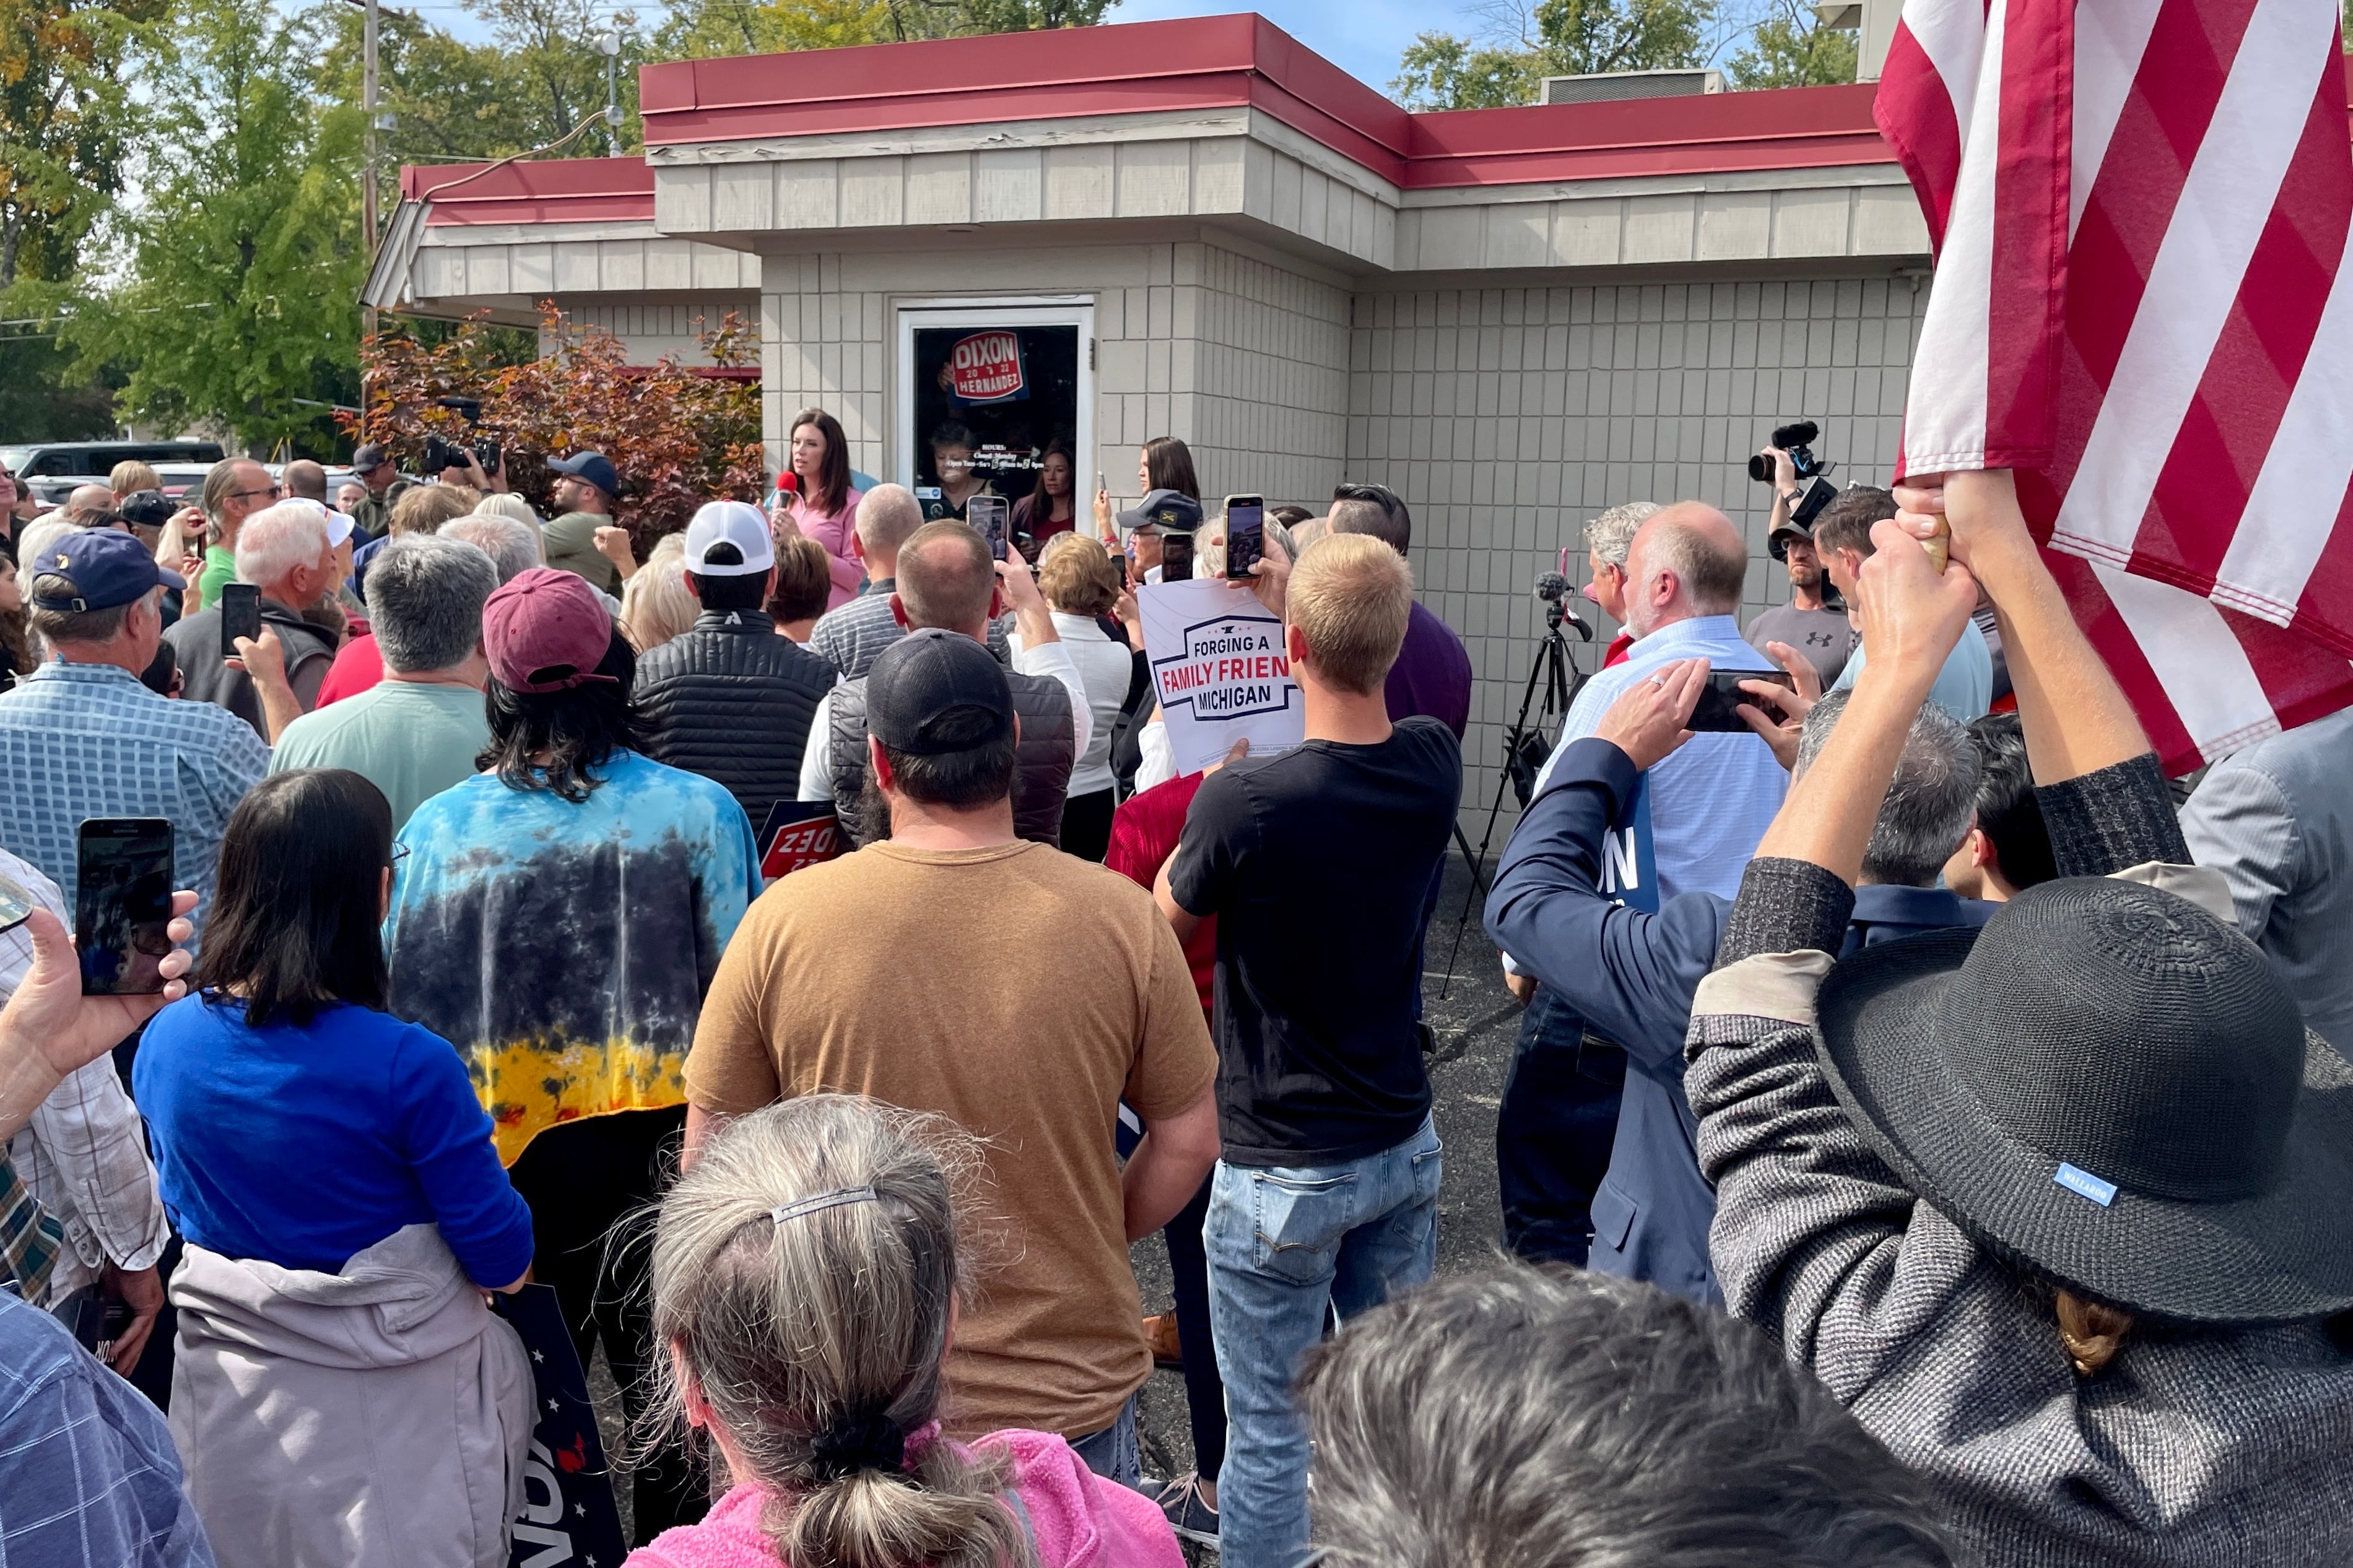 A crowd of supporters listen to Tudor Dixon, who is speaking into a microphone on the steps to the back entrance of a restaurant. Many are recording video on cell phones.